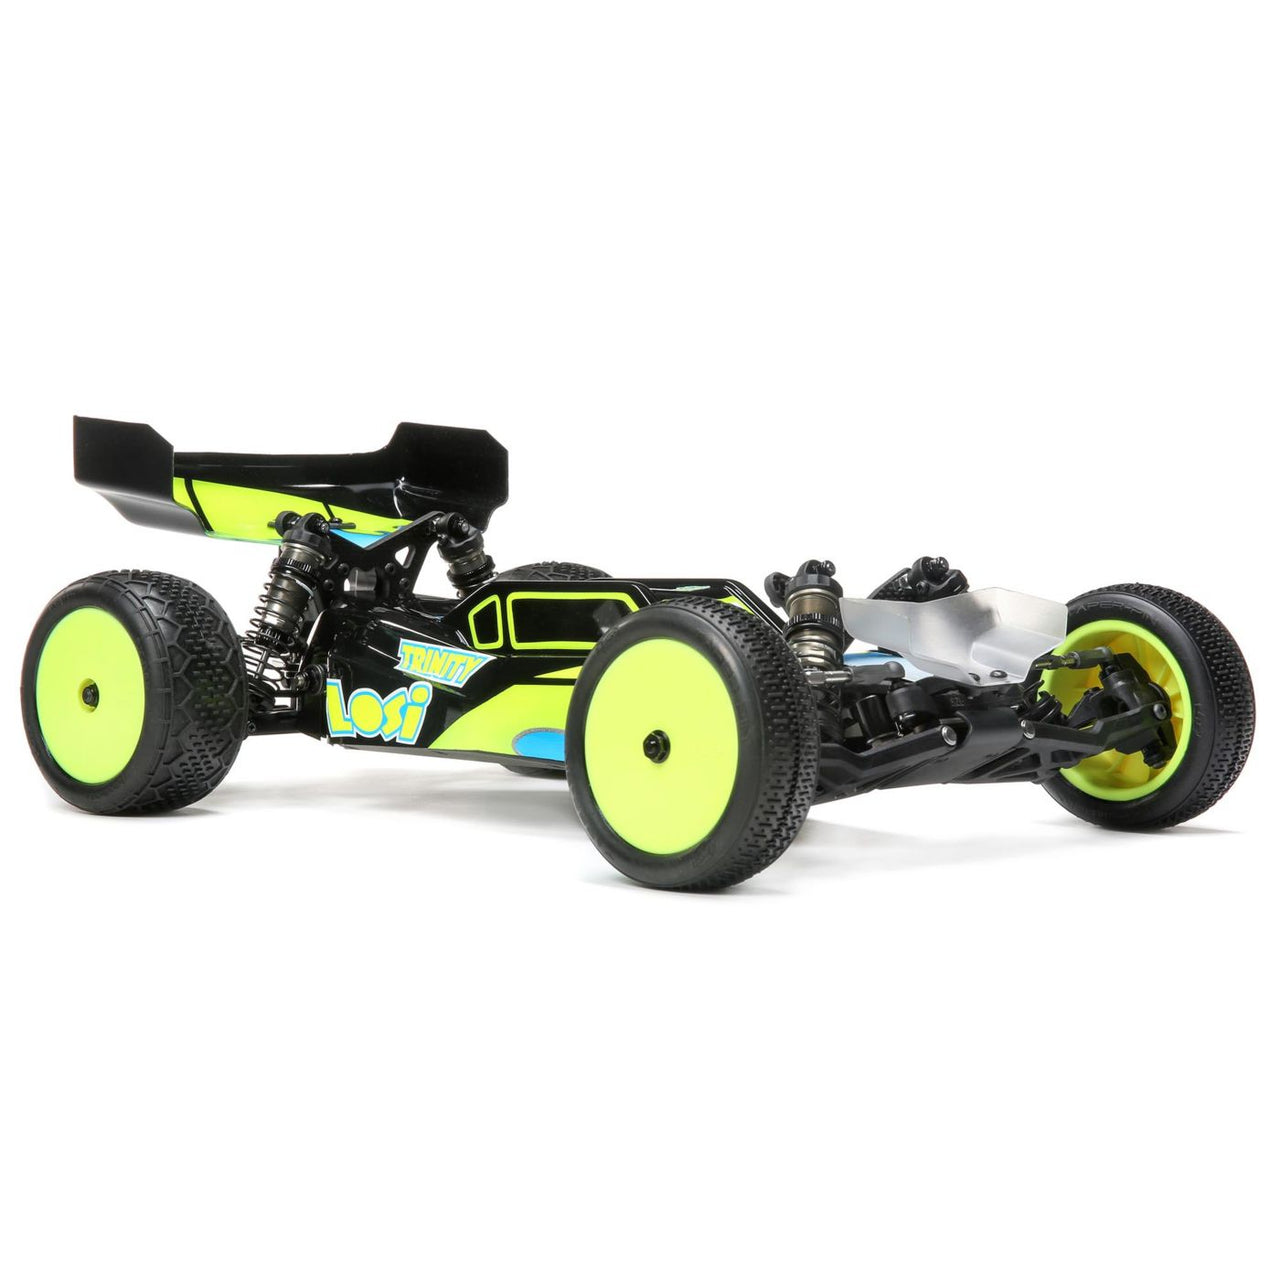 TLR03022 1/10 22 5.0 2WD DC ELITE Race Kit, Dirt/Clay